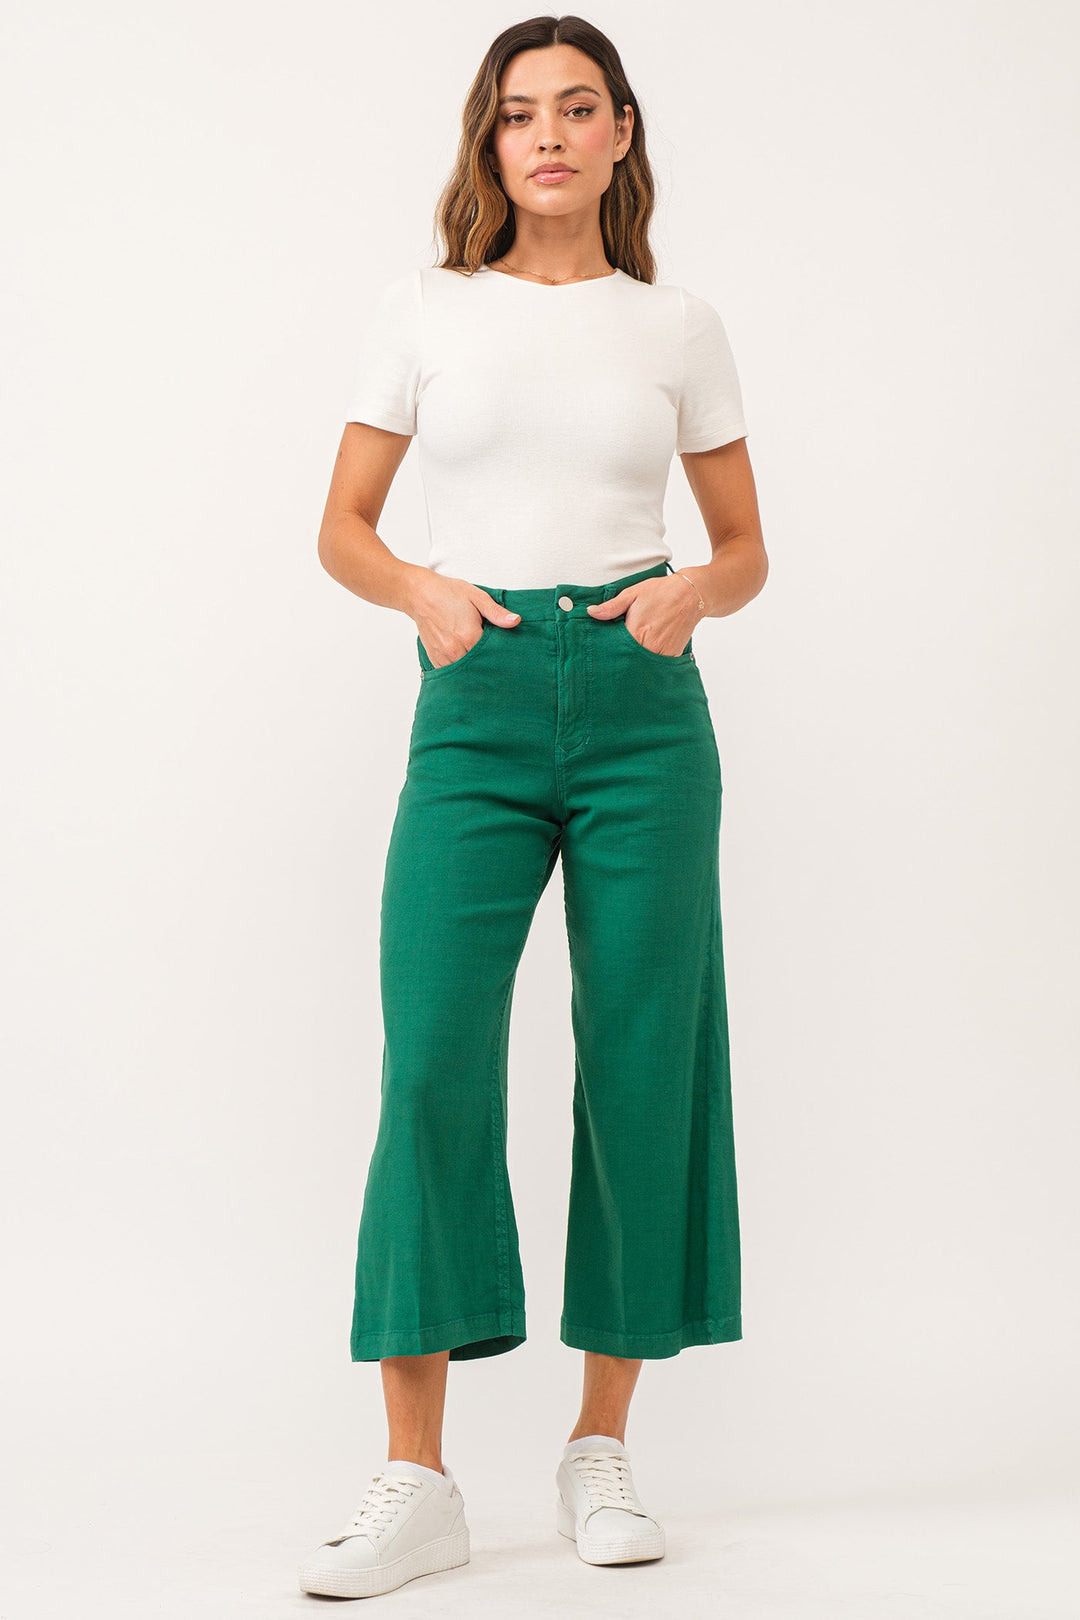 image of a female model wearing a AUDREY SUPER HIGH RISE CROPPED WIDE LEG COLOR PANTS GALAPAGOS GREEN LINEN DEAR JOHN DENIM 